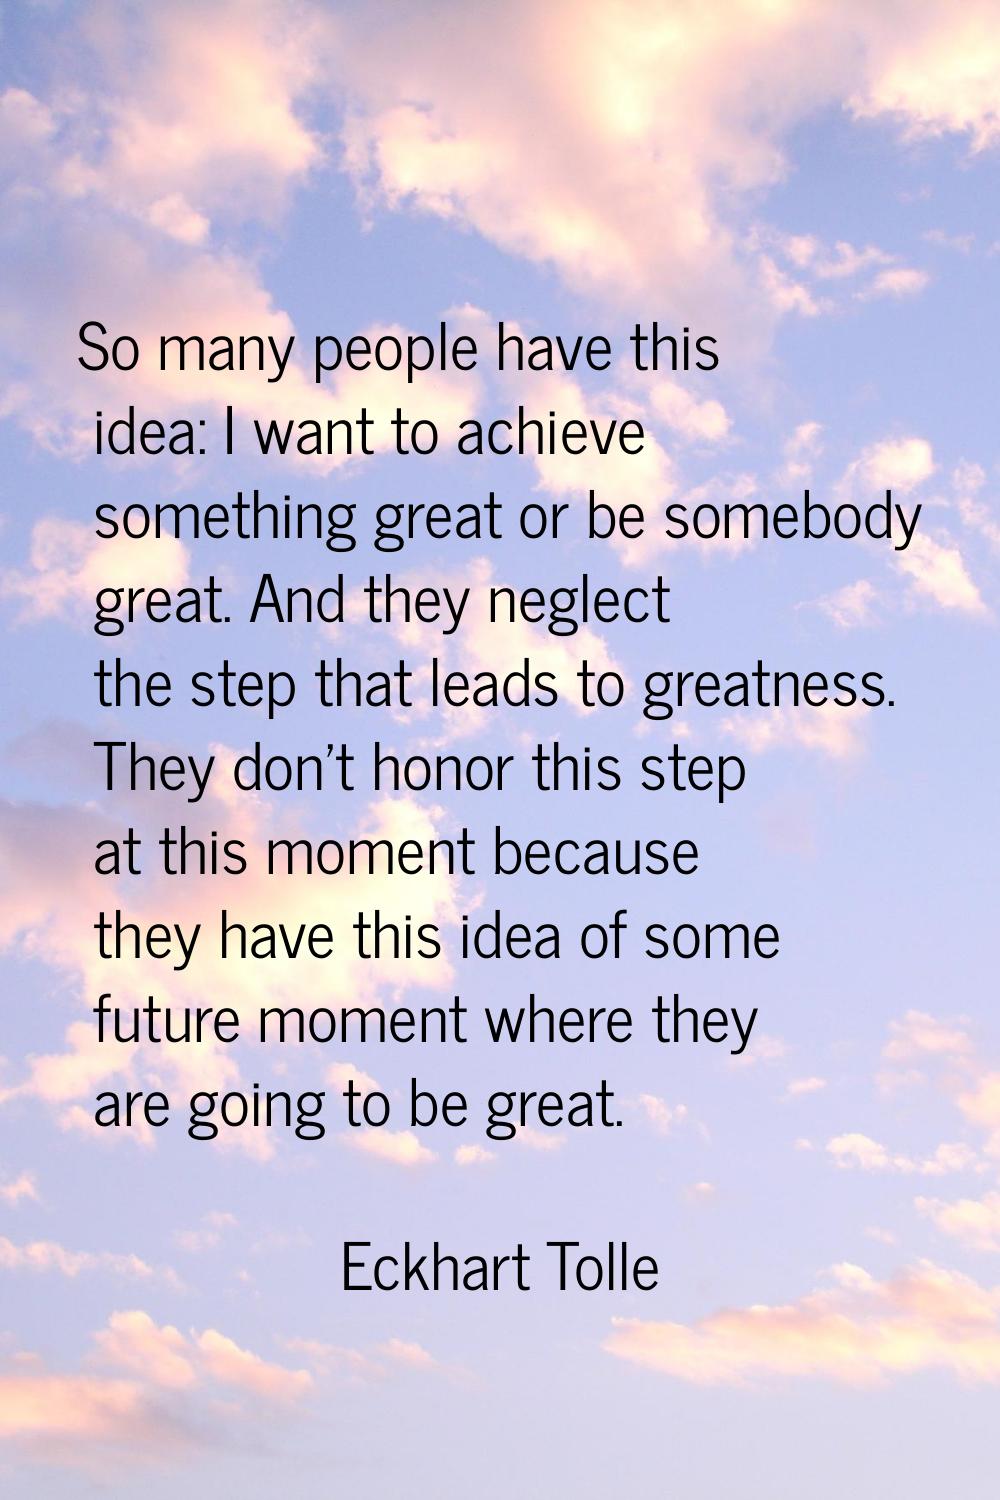 So many people have this idea: I want to achieve something great or be somebody great. And they neg